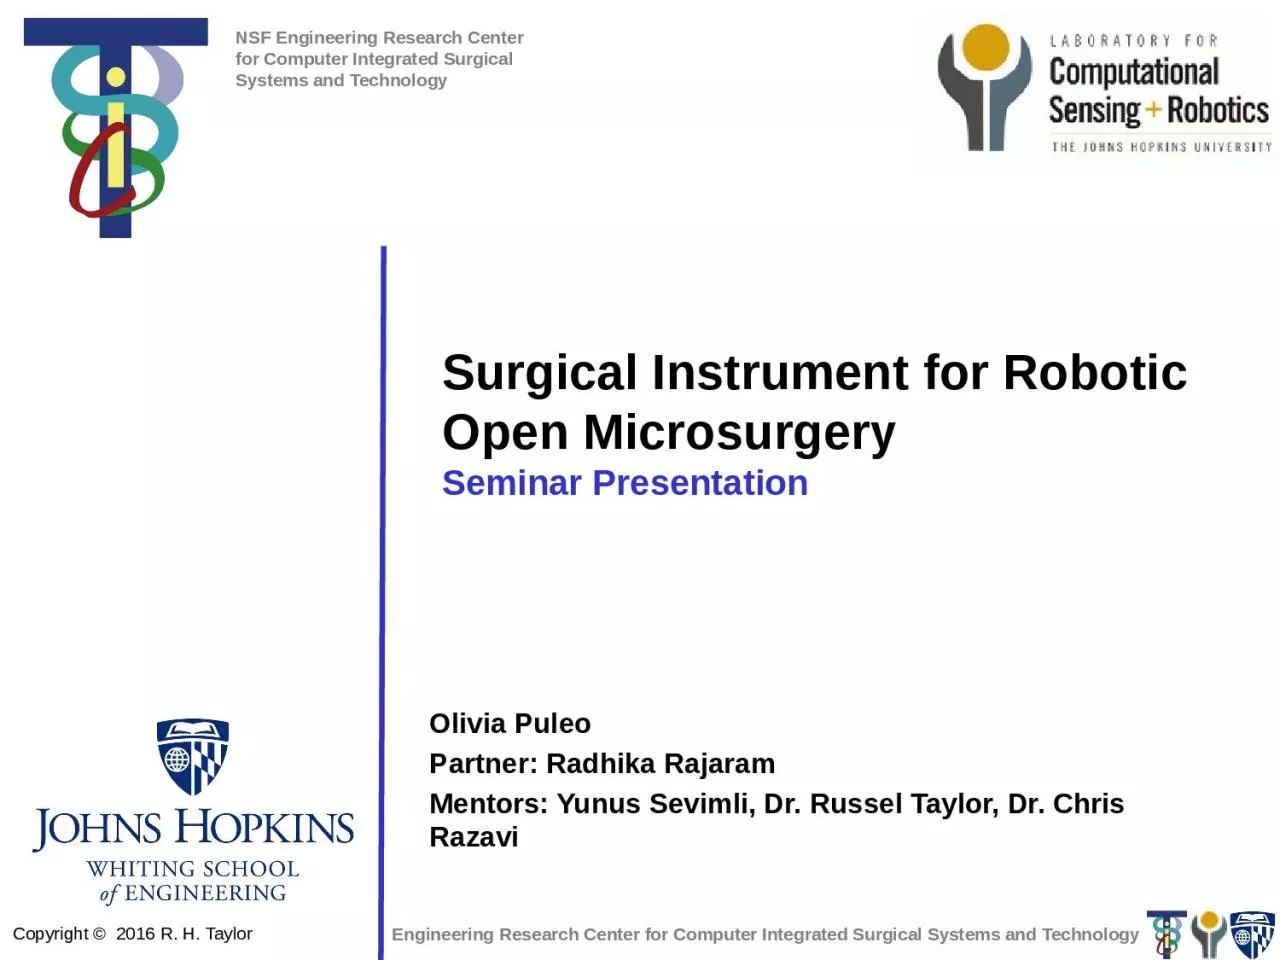 Surgical Instrument for Robotic Open Microsurgery